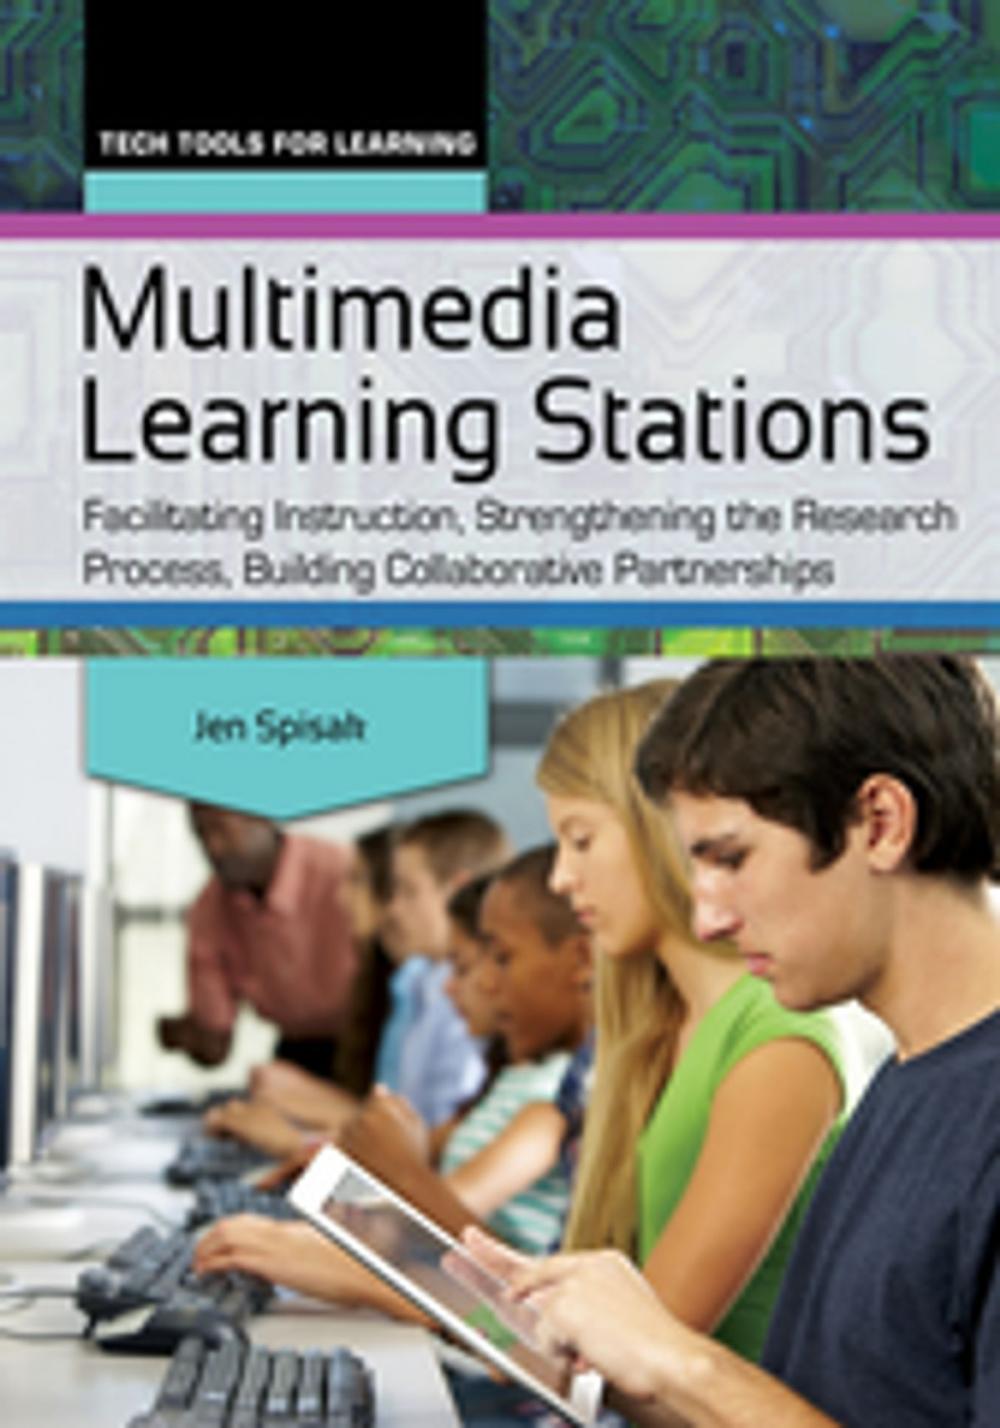 Big bigCover of Multimedia Learning Stations: Facilitating Instruction, Strengthening the Research Process, Building Collaborative Partnerships